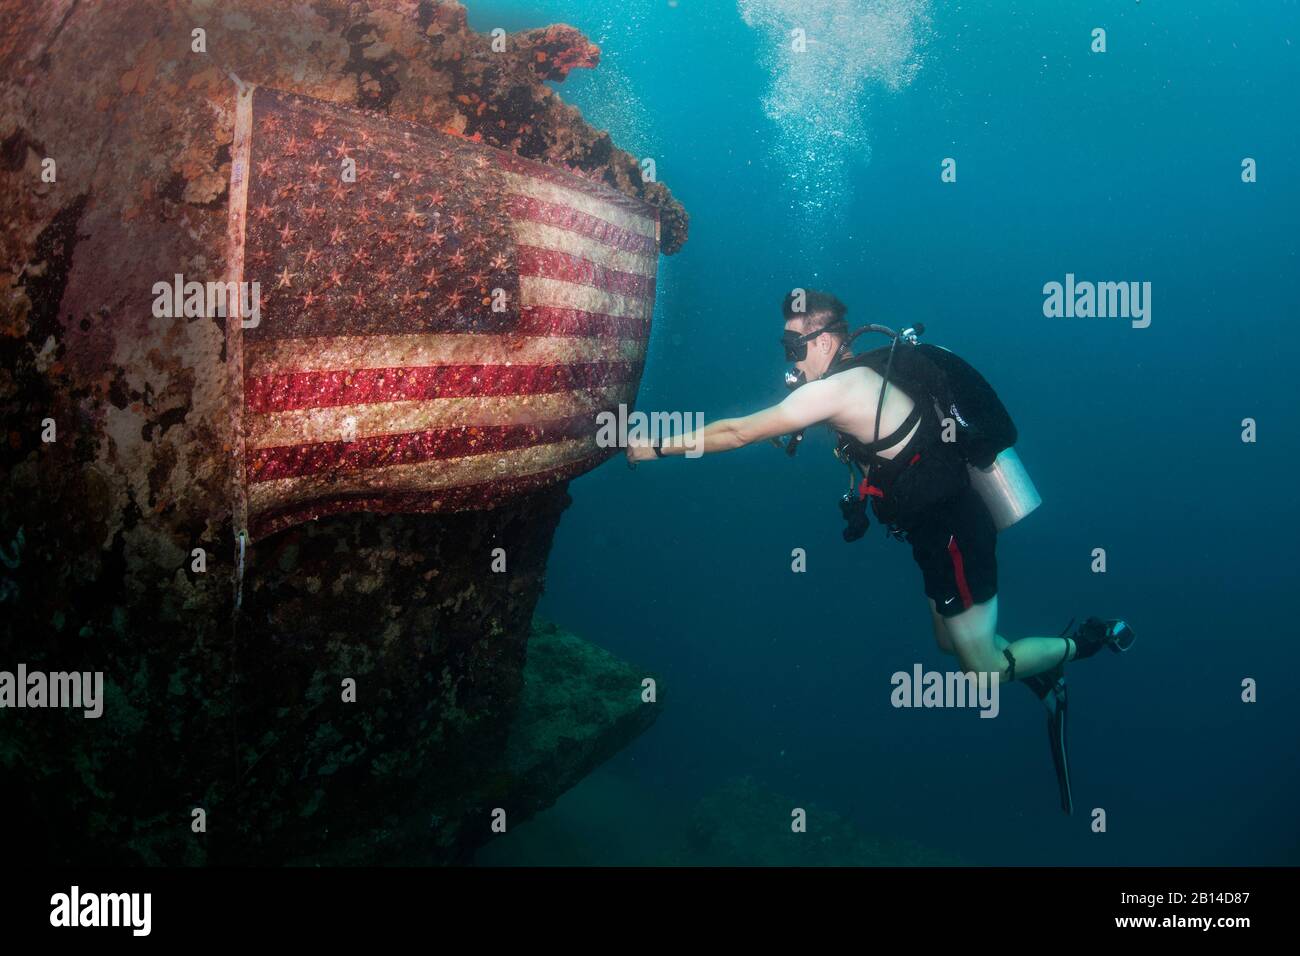 A U.S. Navy master chief petty officer assigned to Explosive Ordnance Disposal (EOD) Group 1 fixes an American flag on the American Tanker, a sunken concrete barge used to transport fuel during WWII, in Guam’s Apra Harbor June 21, 2017. U.S. Navy EOD is the world's premier combat force for countering explosive hazards and conducting expeditionary diving and salvage. (U.S. Navy Combat Camera photo by Mass Communication Specialist 3rd Class Alfred A. Coffield) Stock Photo